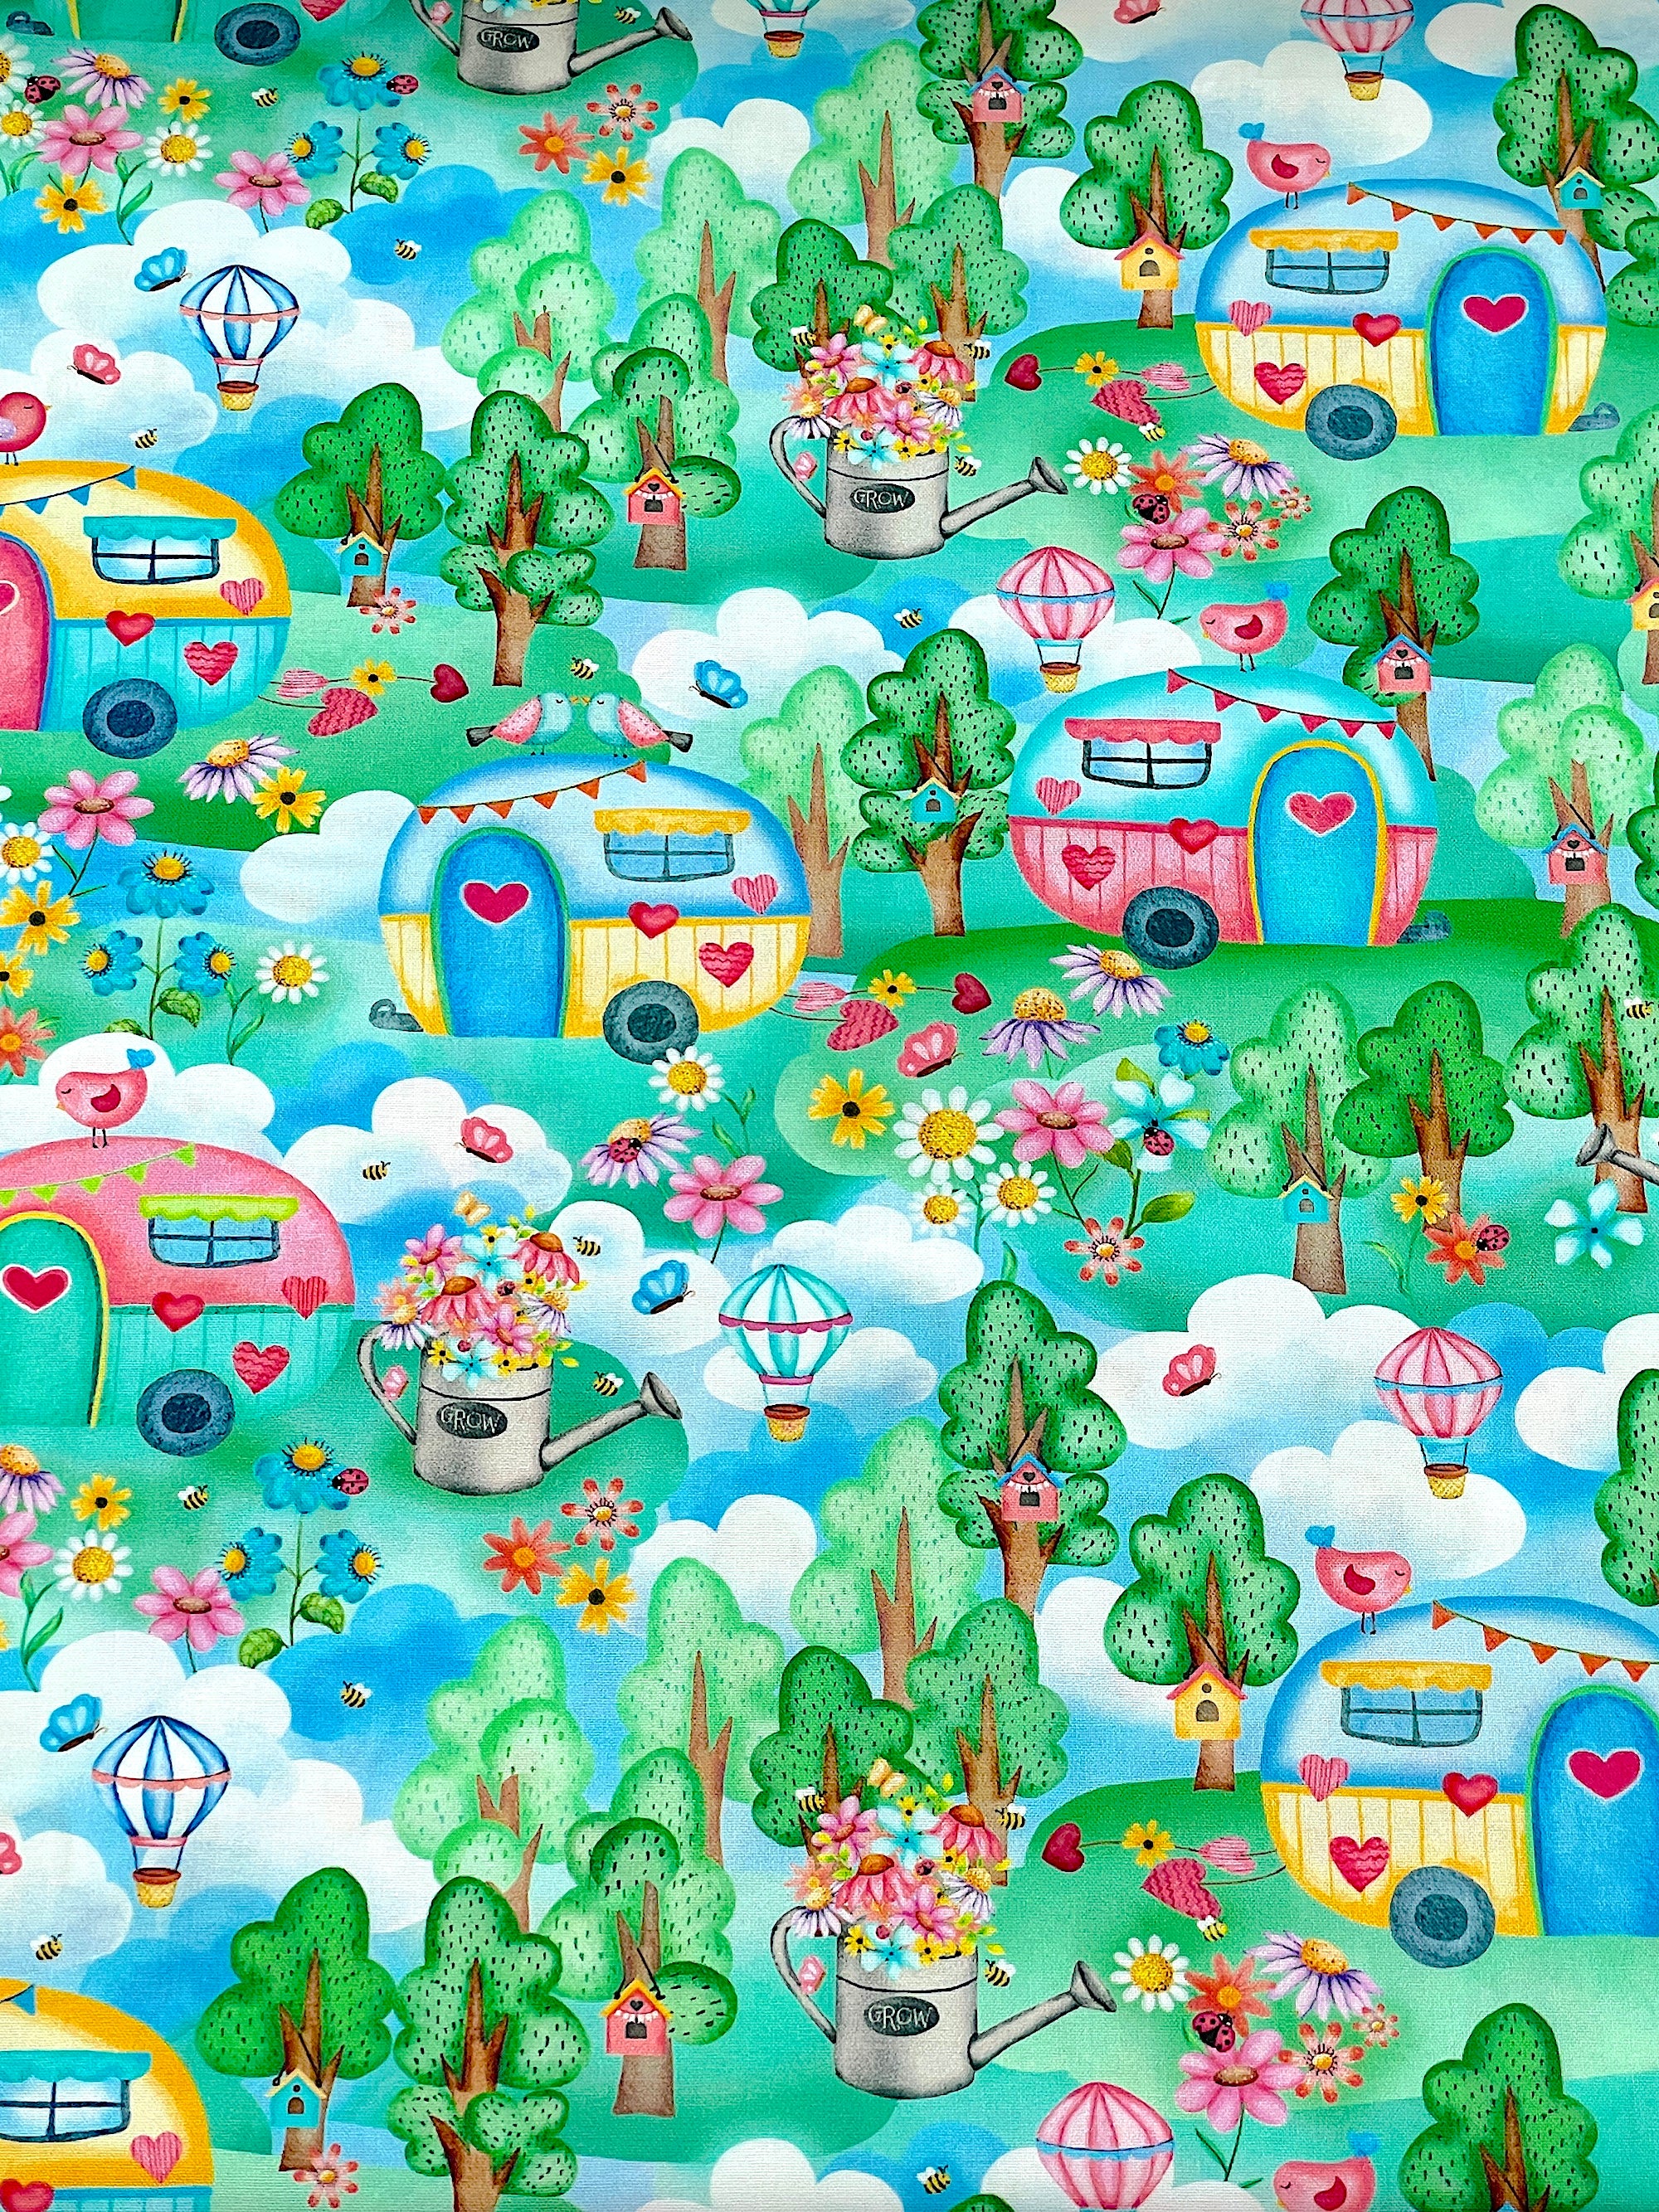 This fabric is part of the Sunshine Days collection by Nicole Decamp.&nbsp; This cotton fabric is covered with clouds, trees, watering cans, flowers, bird houses, birds and more.